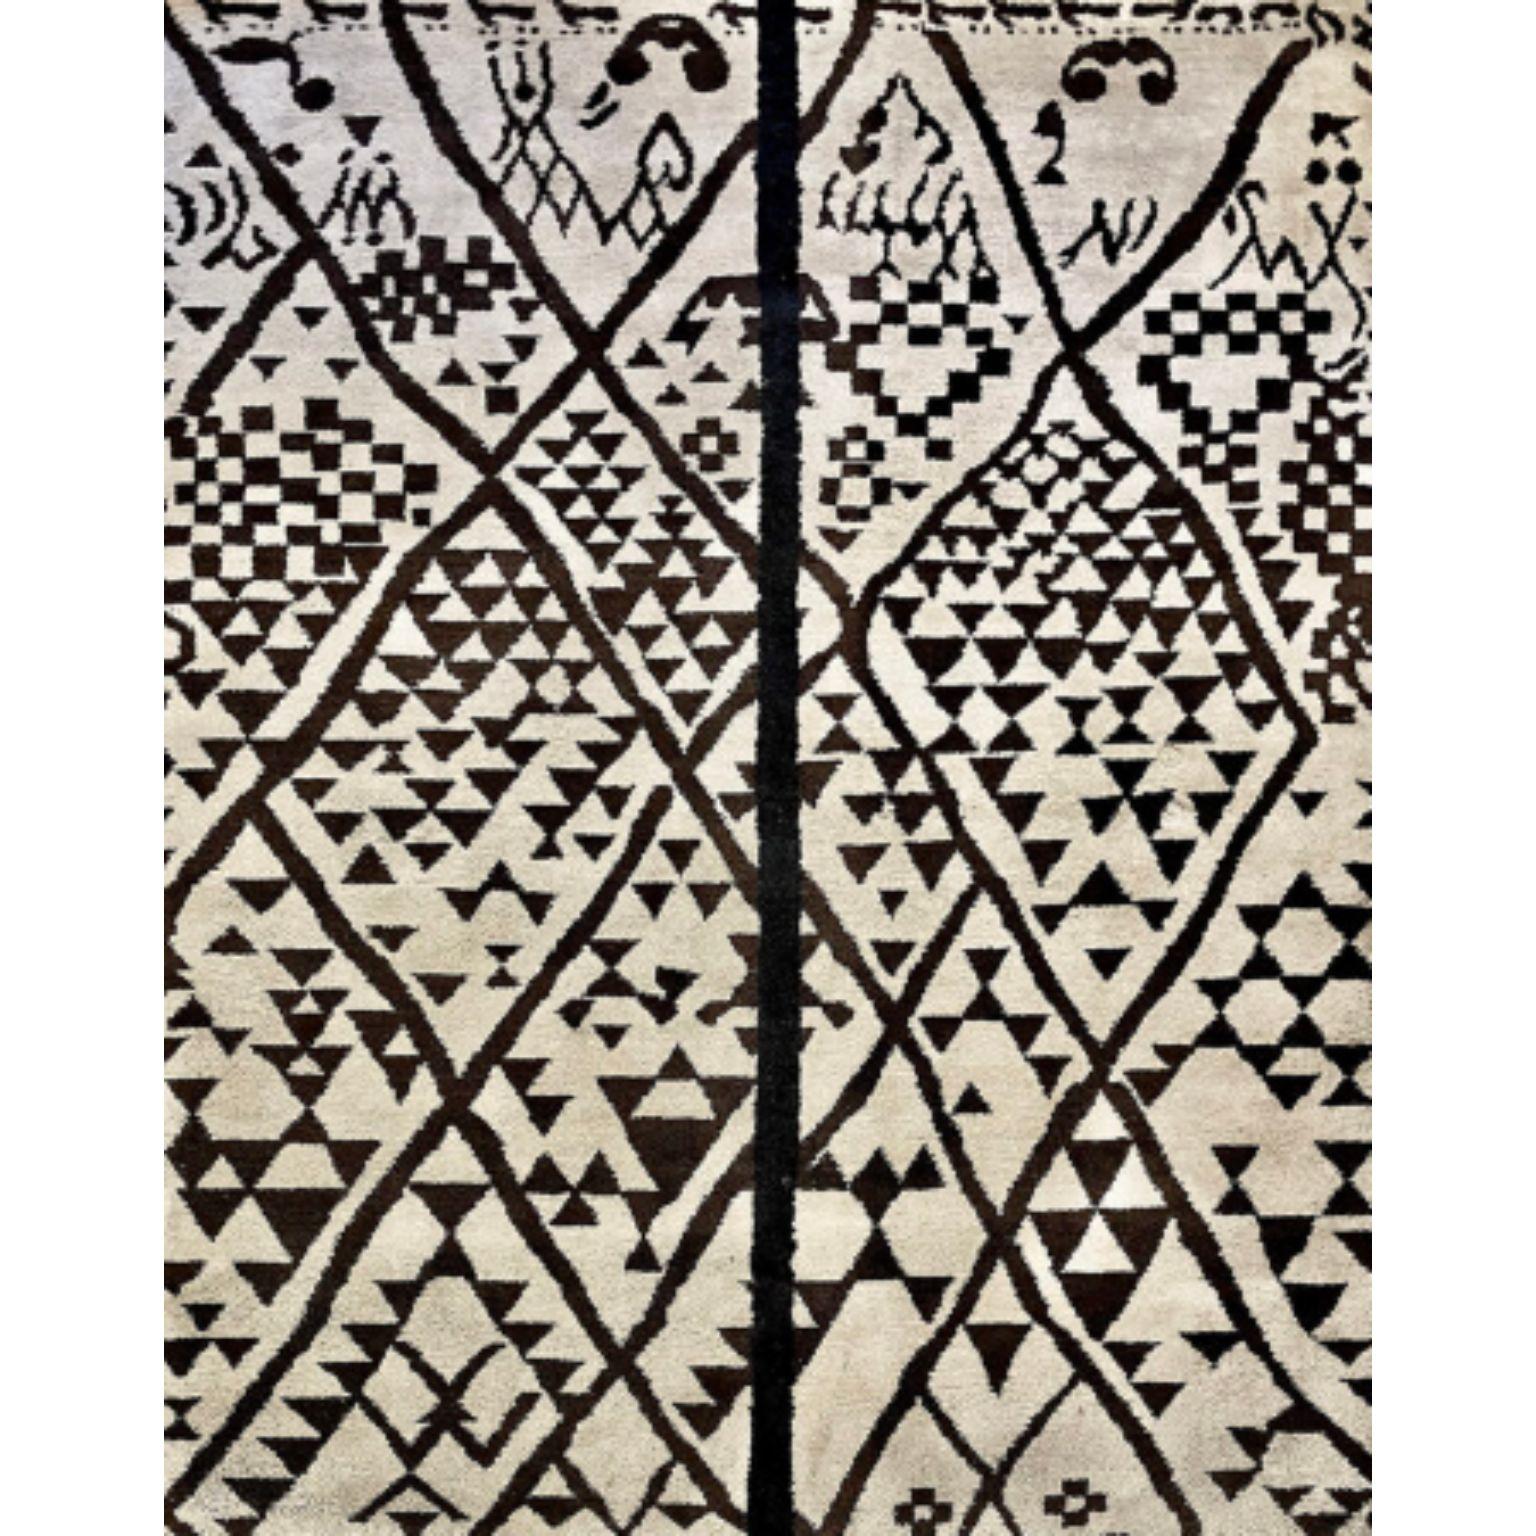 AFRA Rug by Illulian
Dimensions: D300 x H200 cm 
Materials: Wool 80%, Silk 20%
Variations available and prices may vary according to materials and sizes.

Illulian, historic and prestigious rug company brand, internationally renowned in the